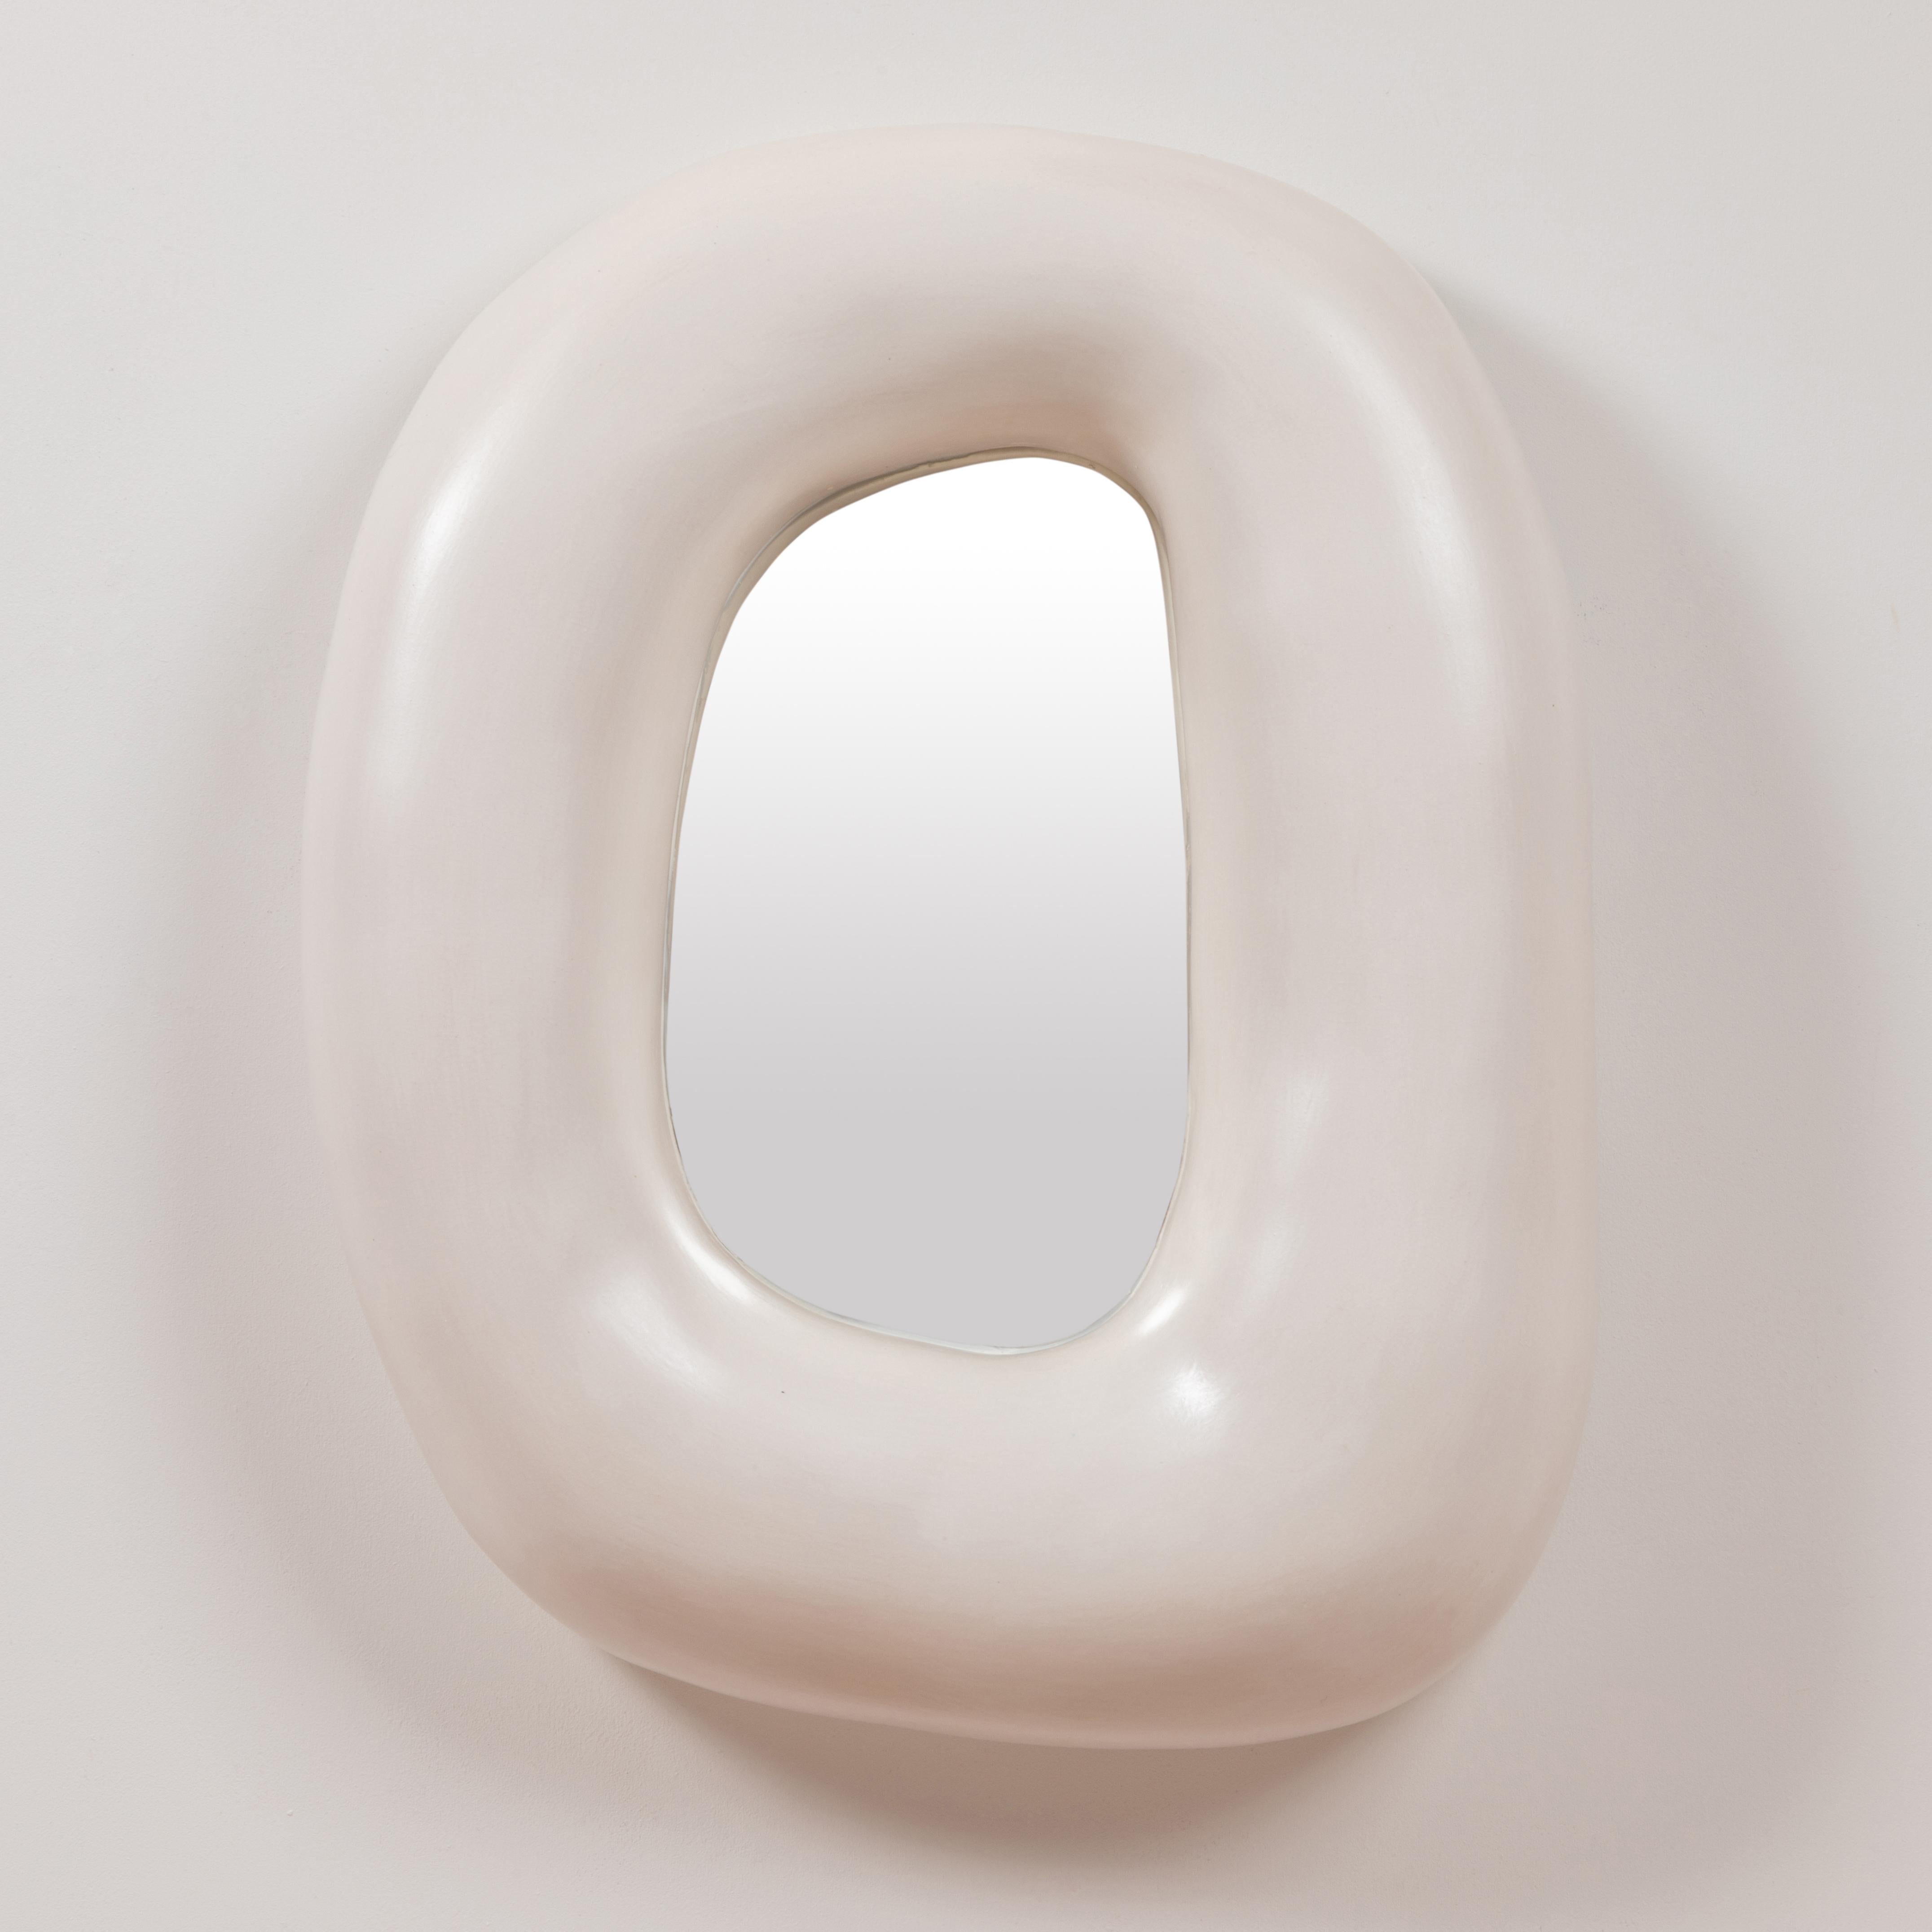 White mirror by Elsa Foulon
Dimensions: D 50 x H 40 cm 
Materials: Ceramic, mirror
Unique piece

Elsa Foulon, before becoming a ceramist, was born the daughter of an antique dealer and then became a dealer in 20th century decorative arts. She